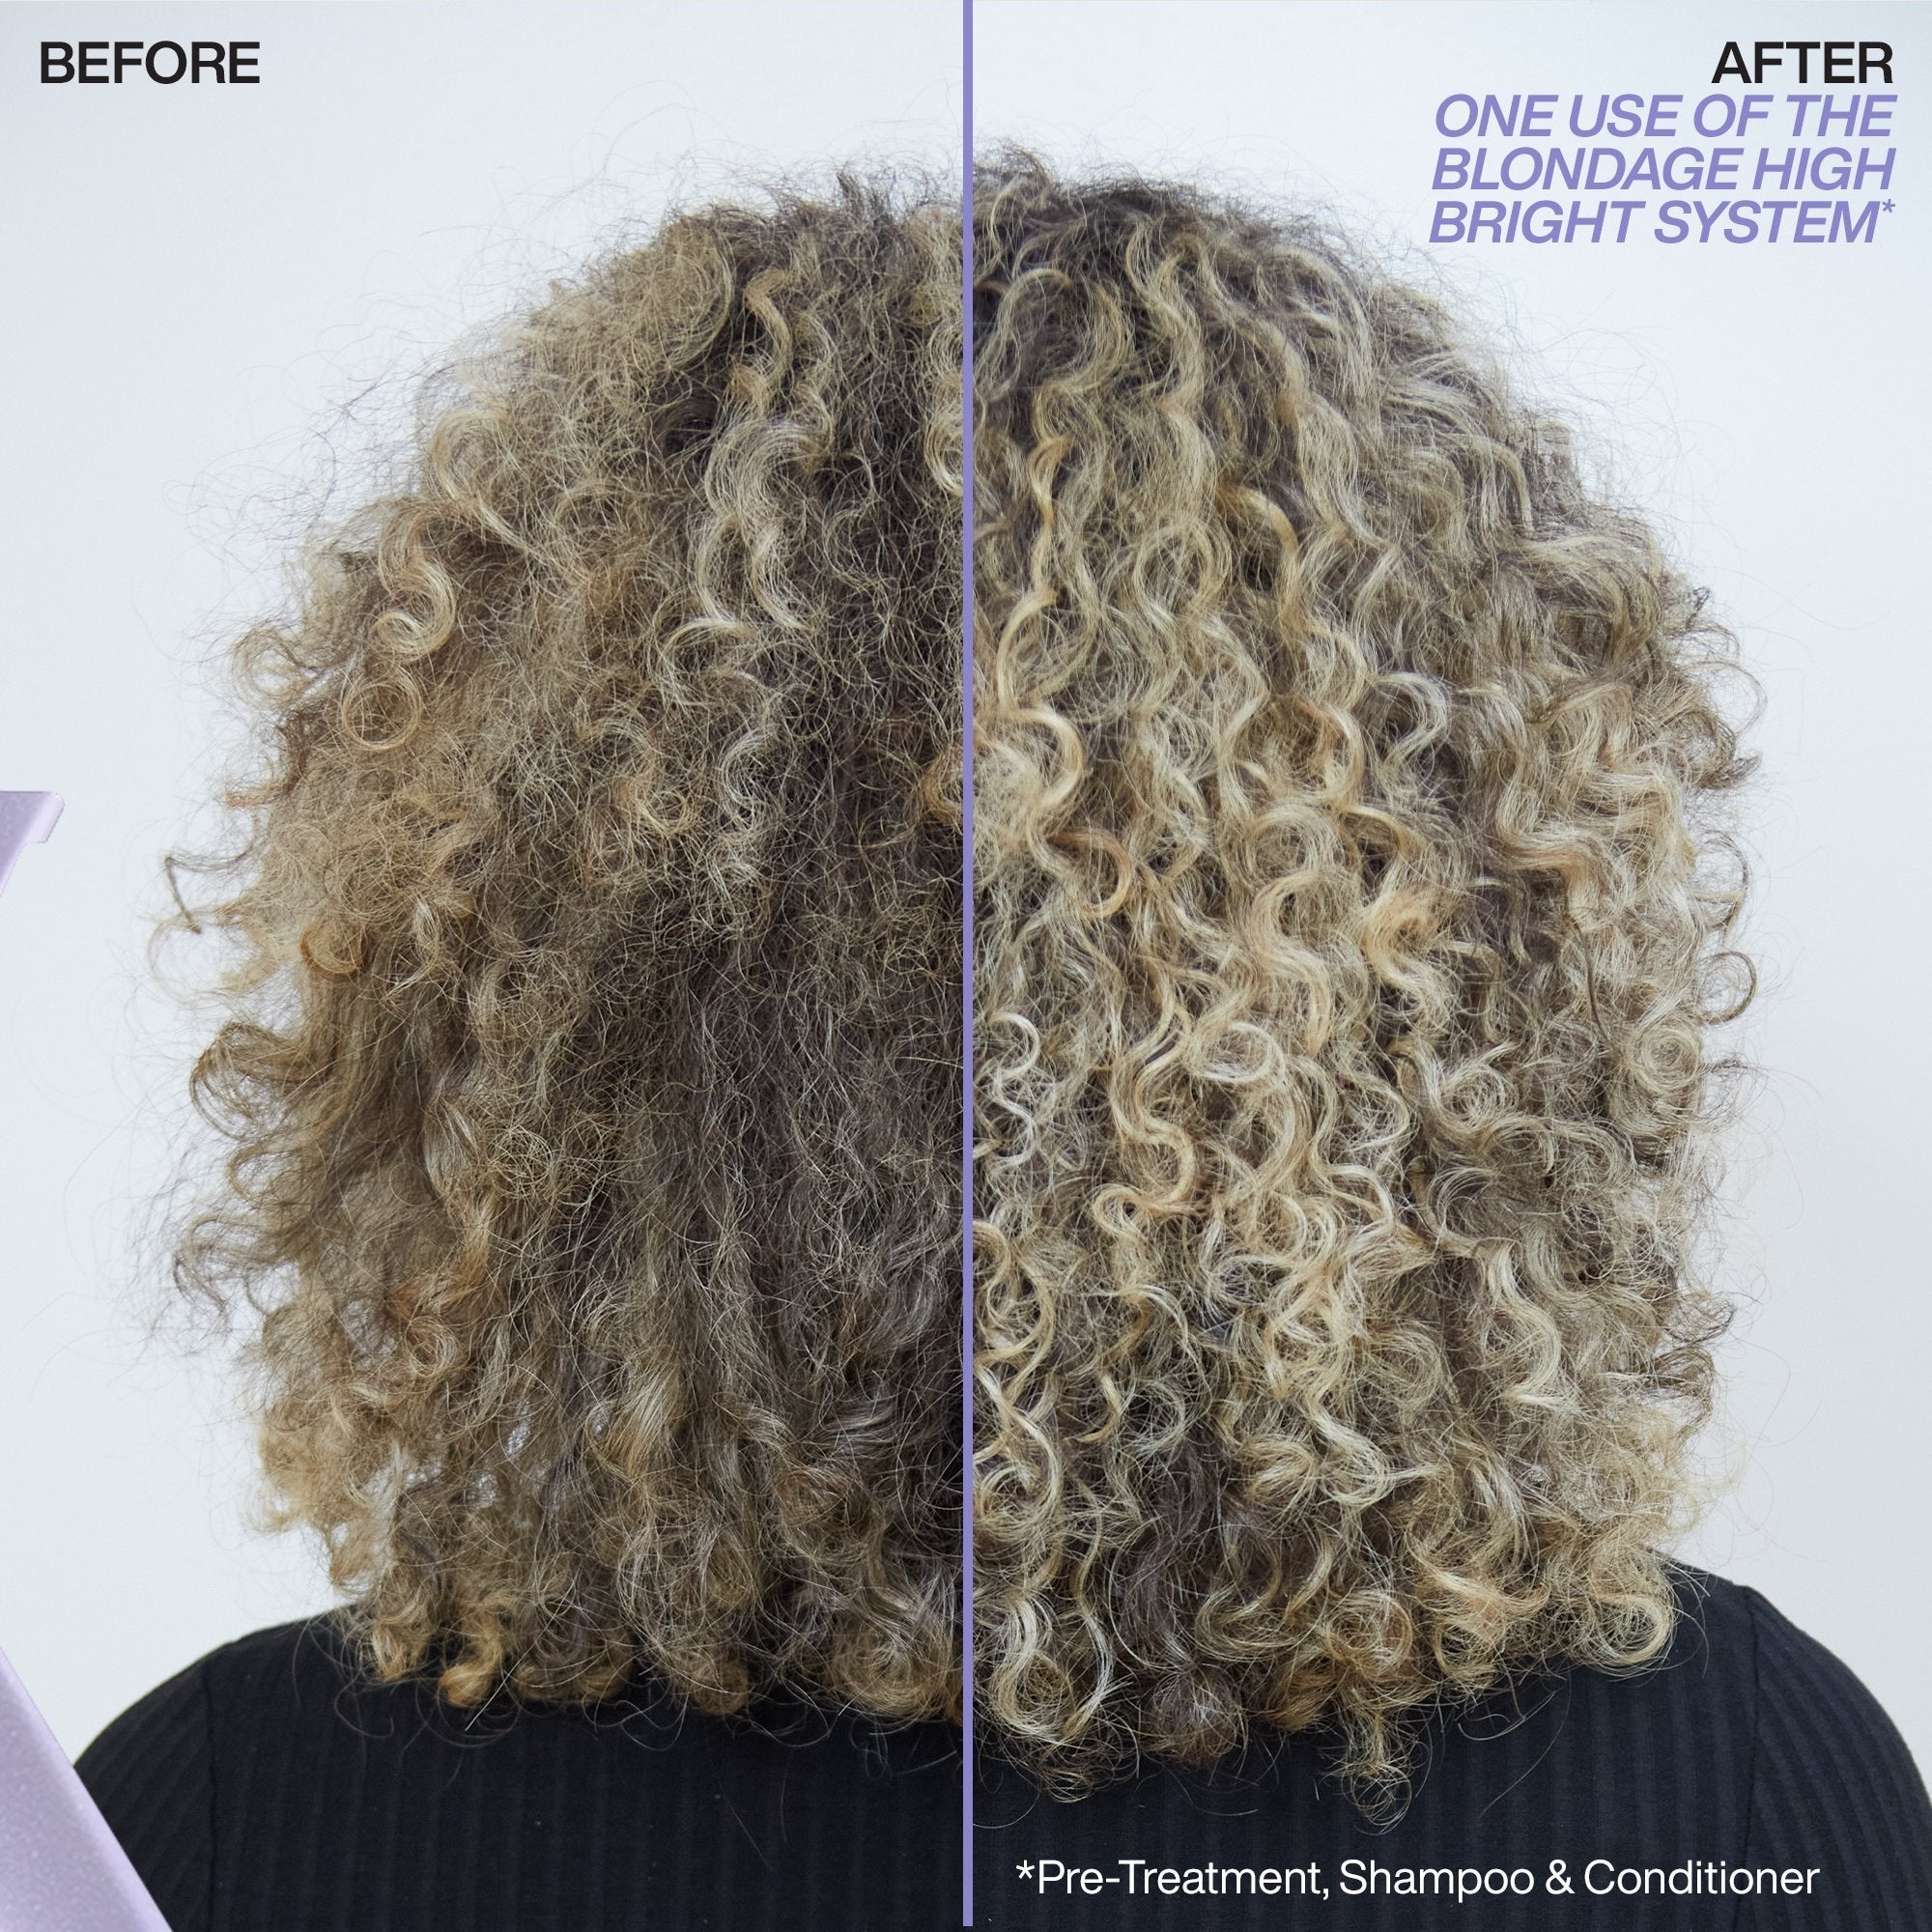 Redken Blondage High Bright Set Before and After